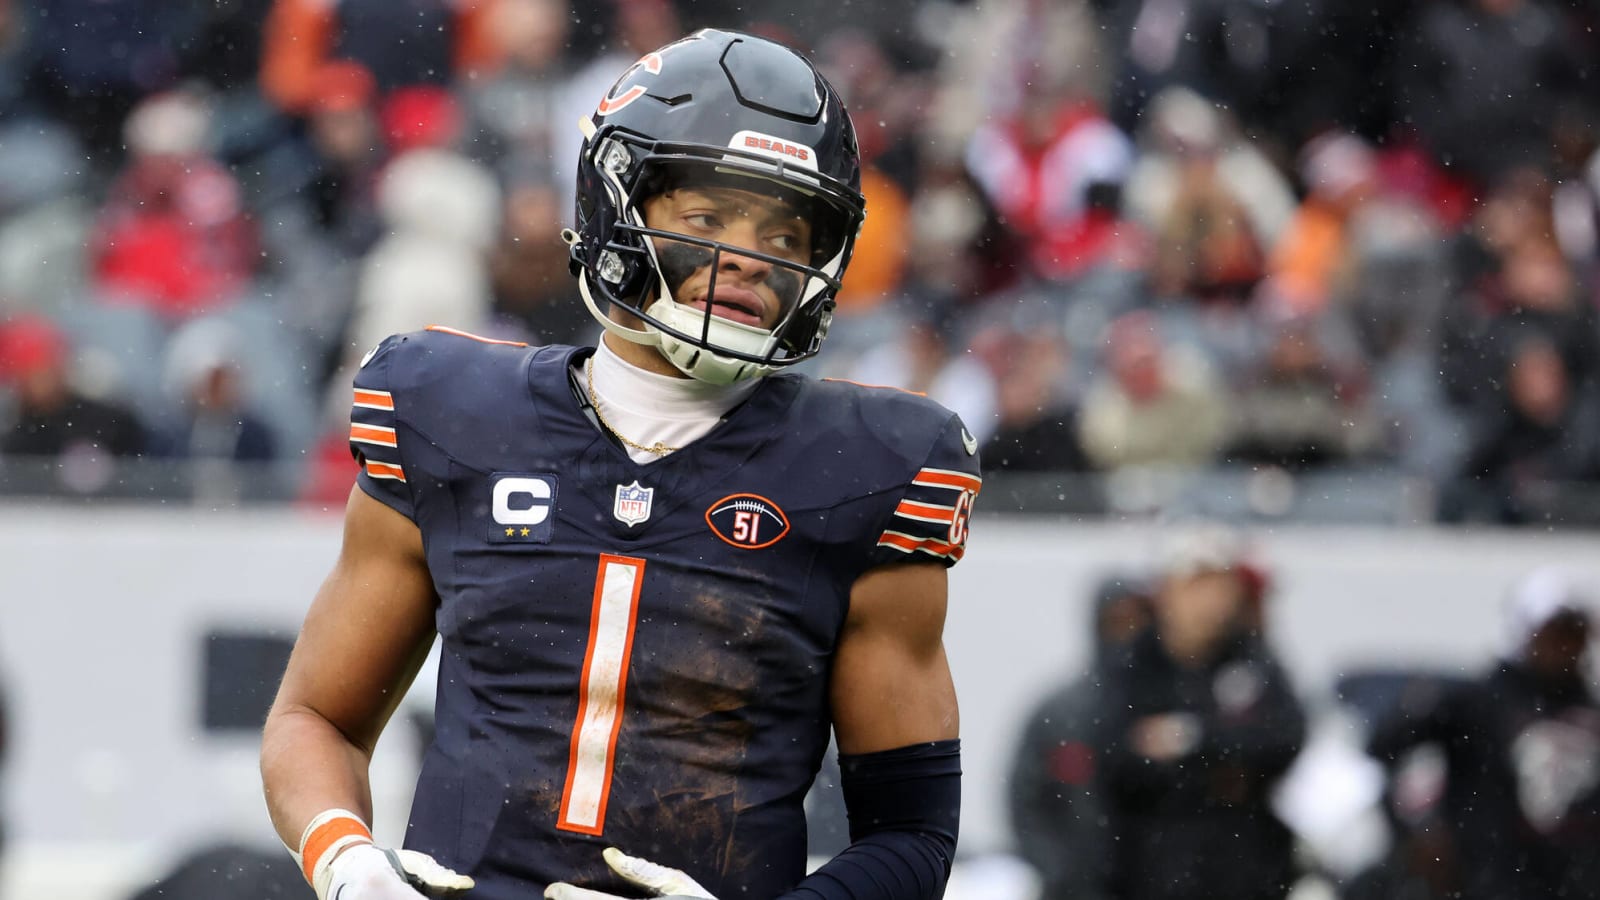 Report: Former Chicago Bears coach gets revenge on Justin Fields for ‘coaching’ comment